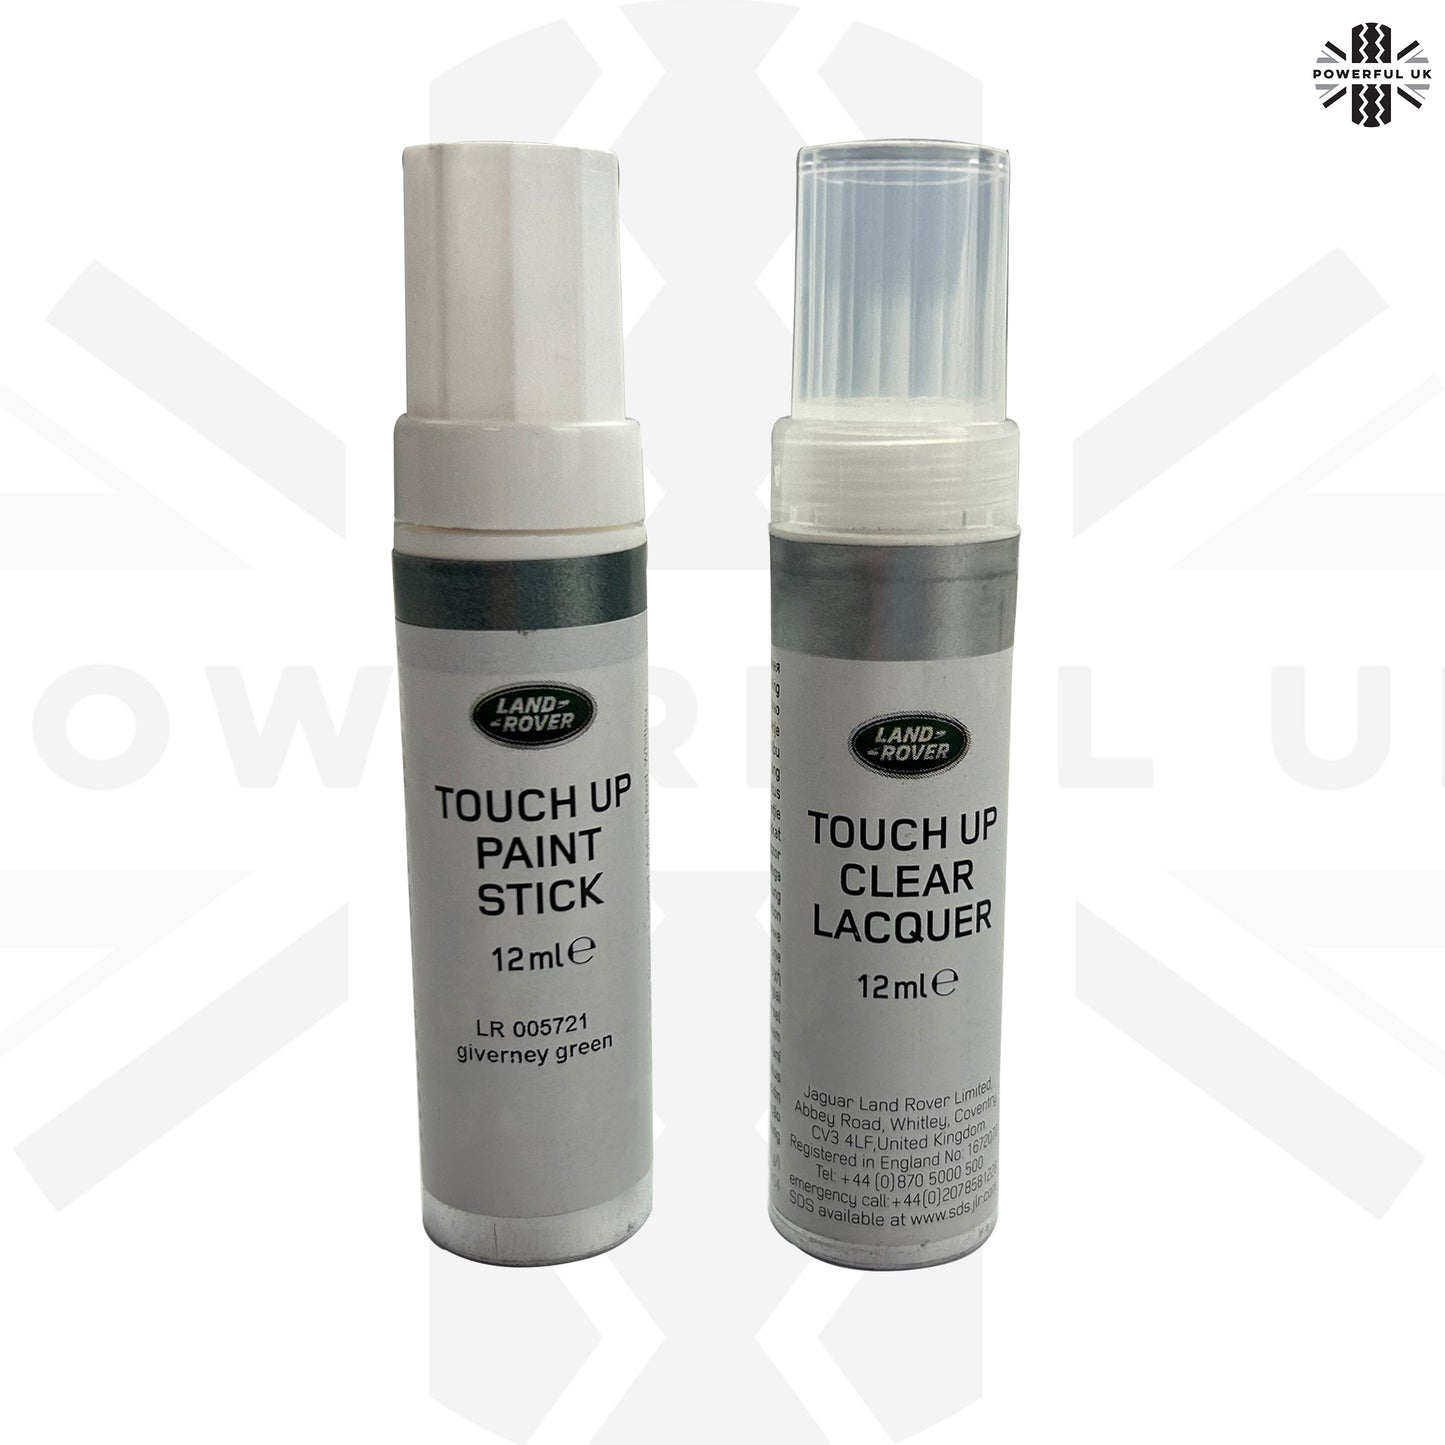 Genuine 'Giverney Green' Touch Up Paint Kit